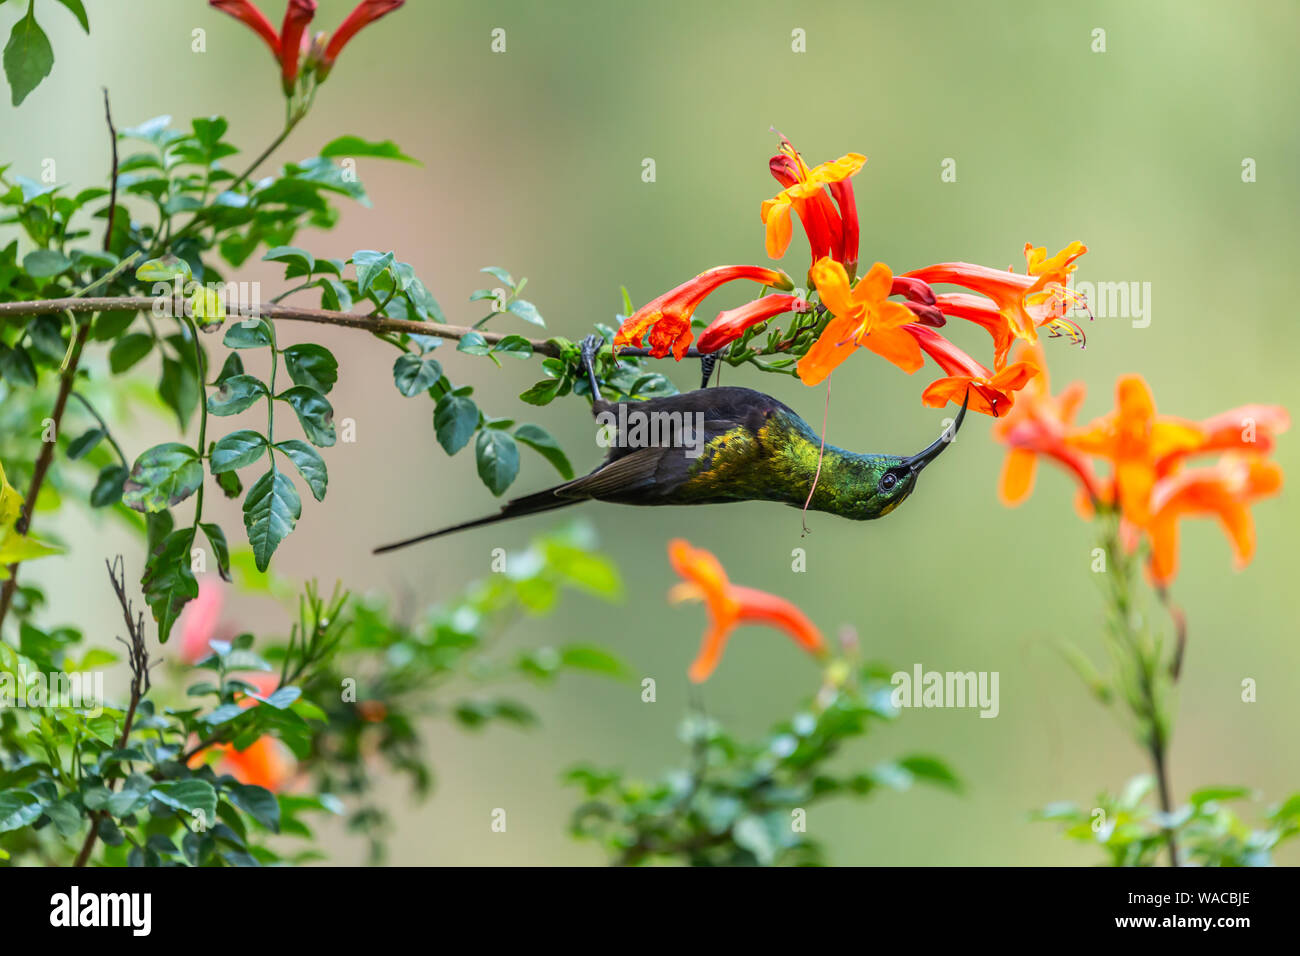 Colour wildlife portrait of Bronzy sunbird (Nectarinia kilimensis) hanging upside down from branch with beautiful red and orange flowers, taken in Nan Stock Photo